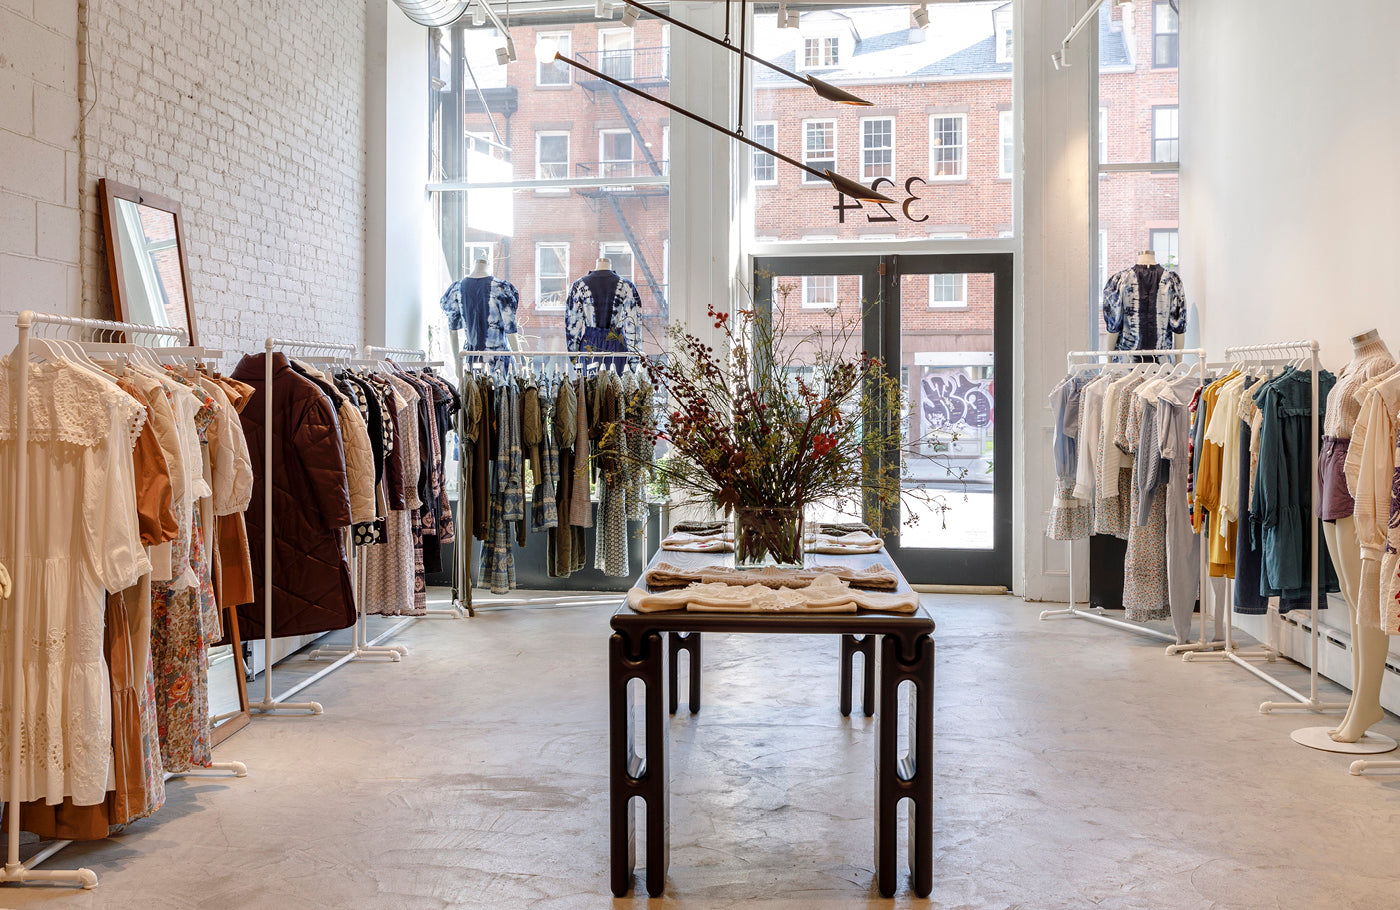 Club Monaco is permanently closing its flagship Toronto store this week  after 25 years